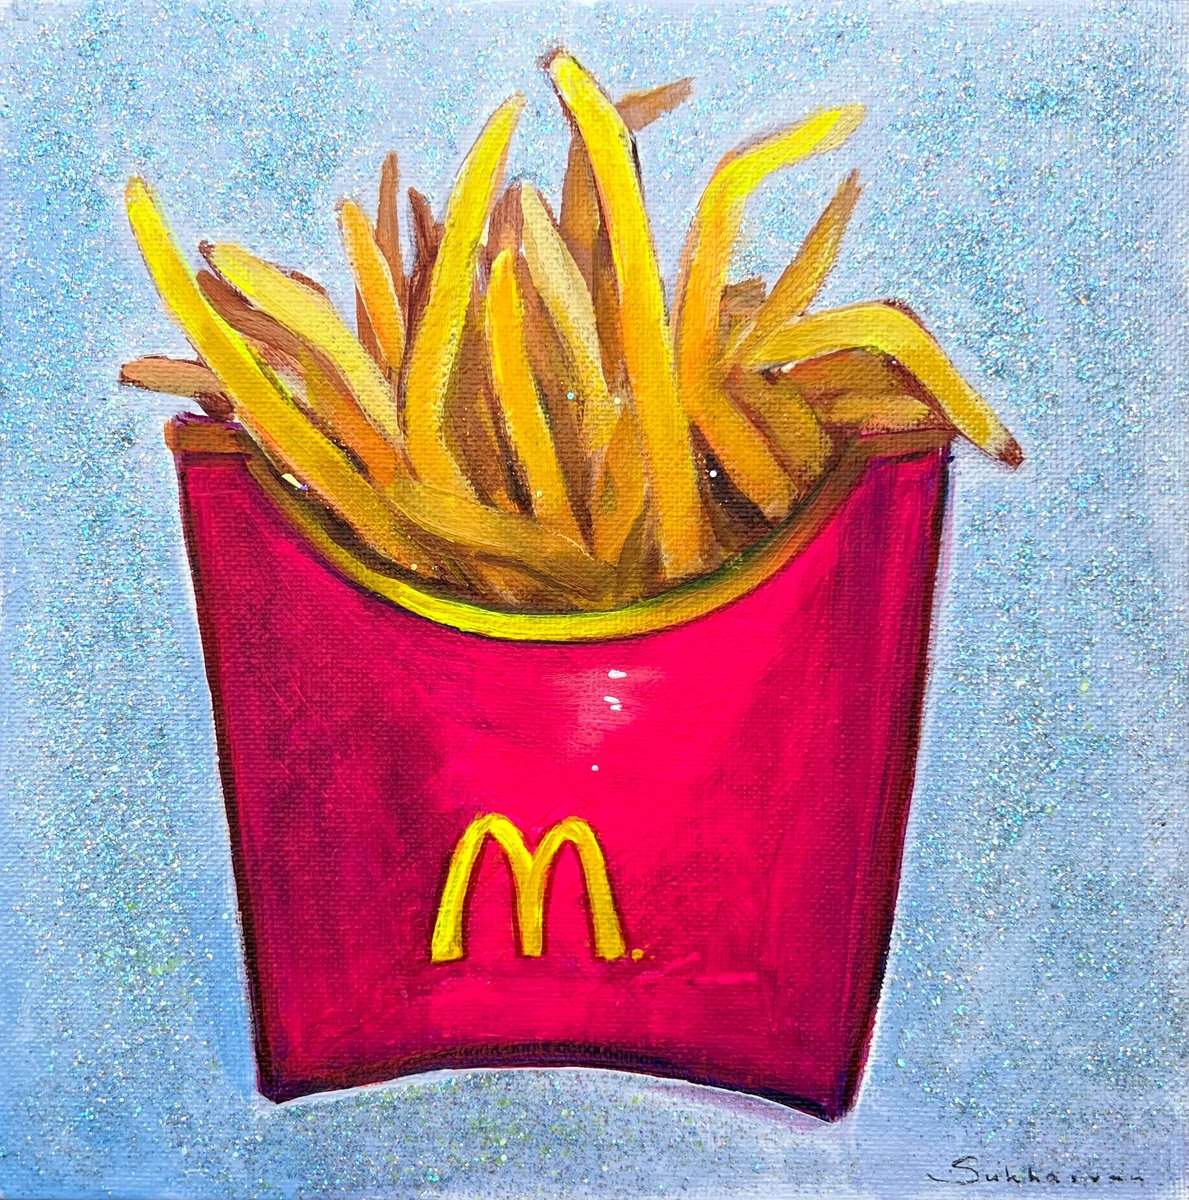 McDonalds French Fries in a Pink Box by Victoria Sukhasyan